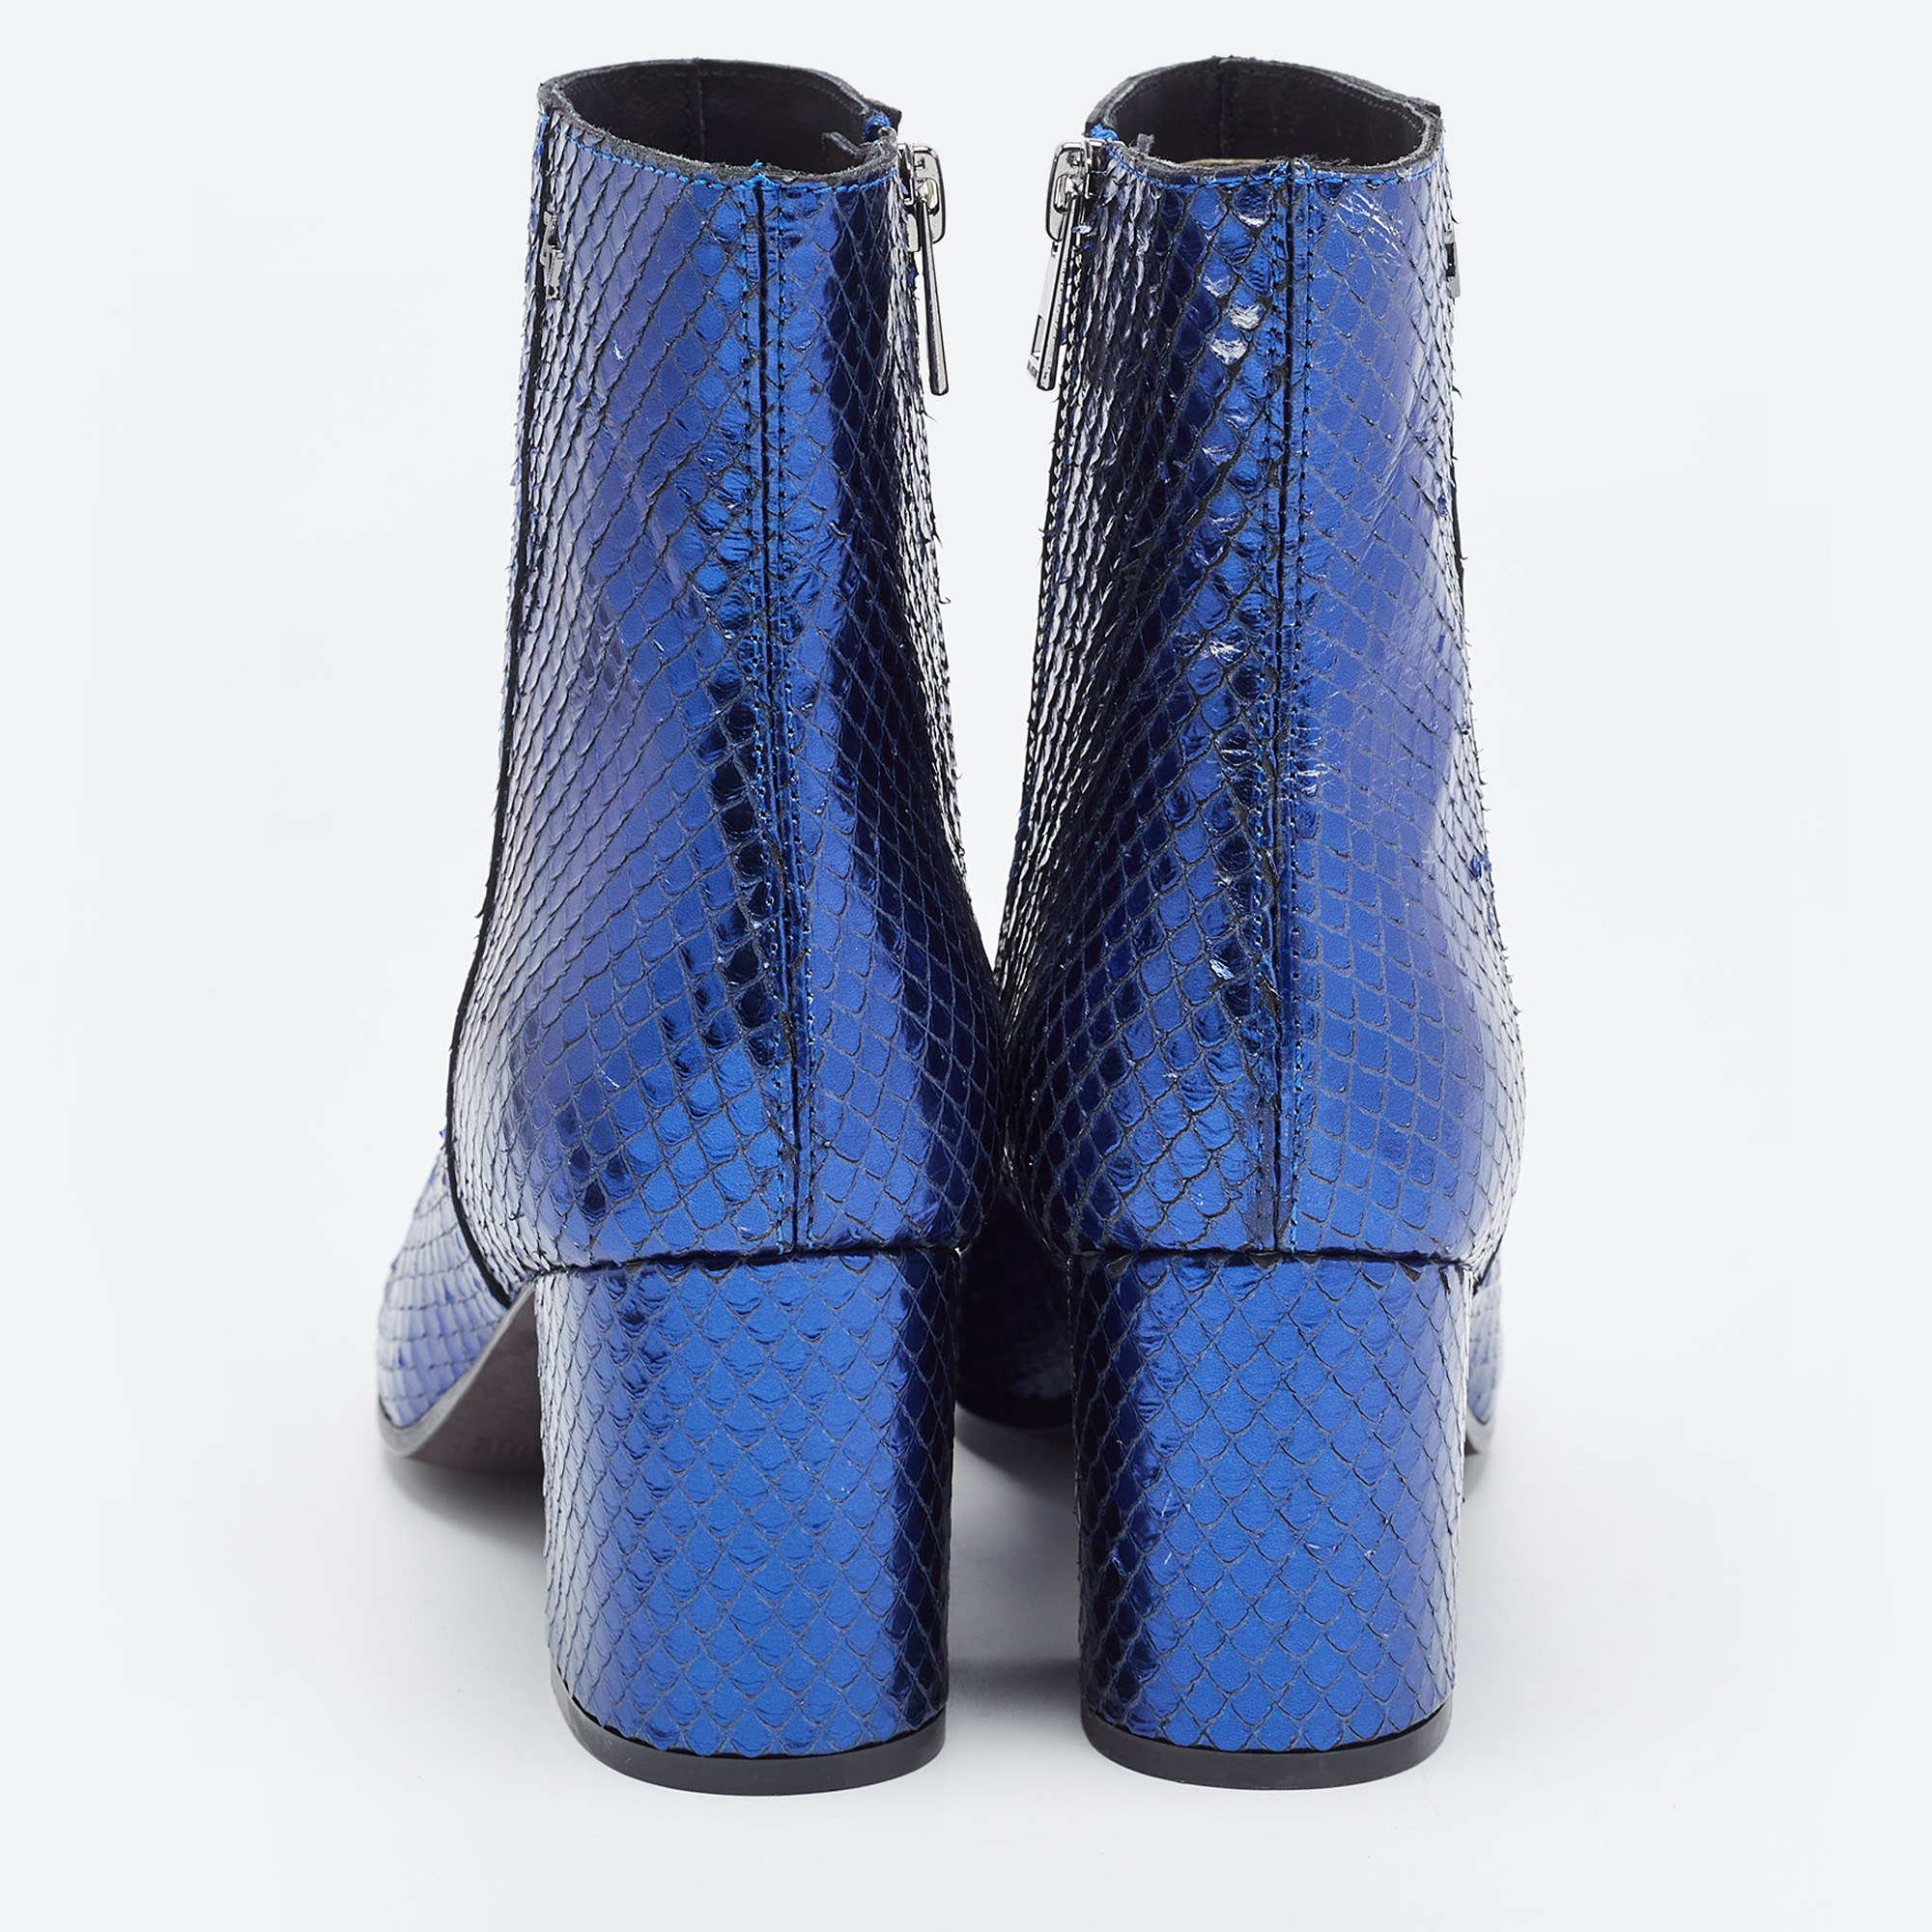 Zadig & Voltaire Blue Python Ankle Boots Size 36